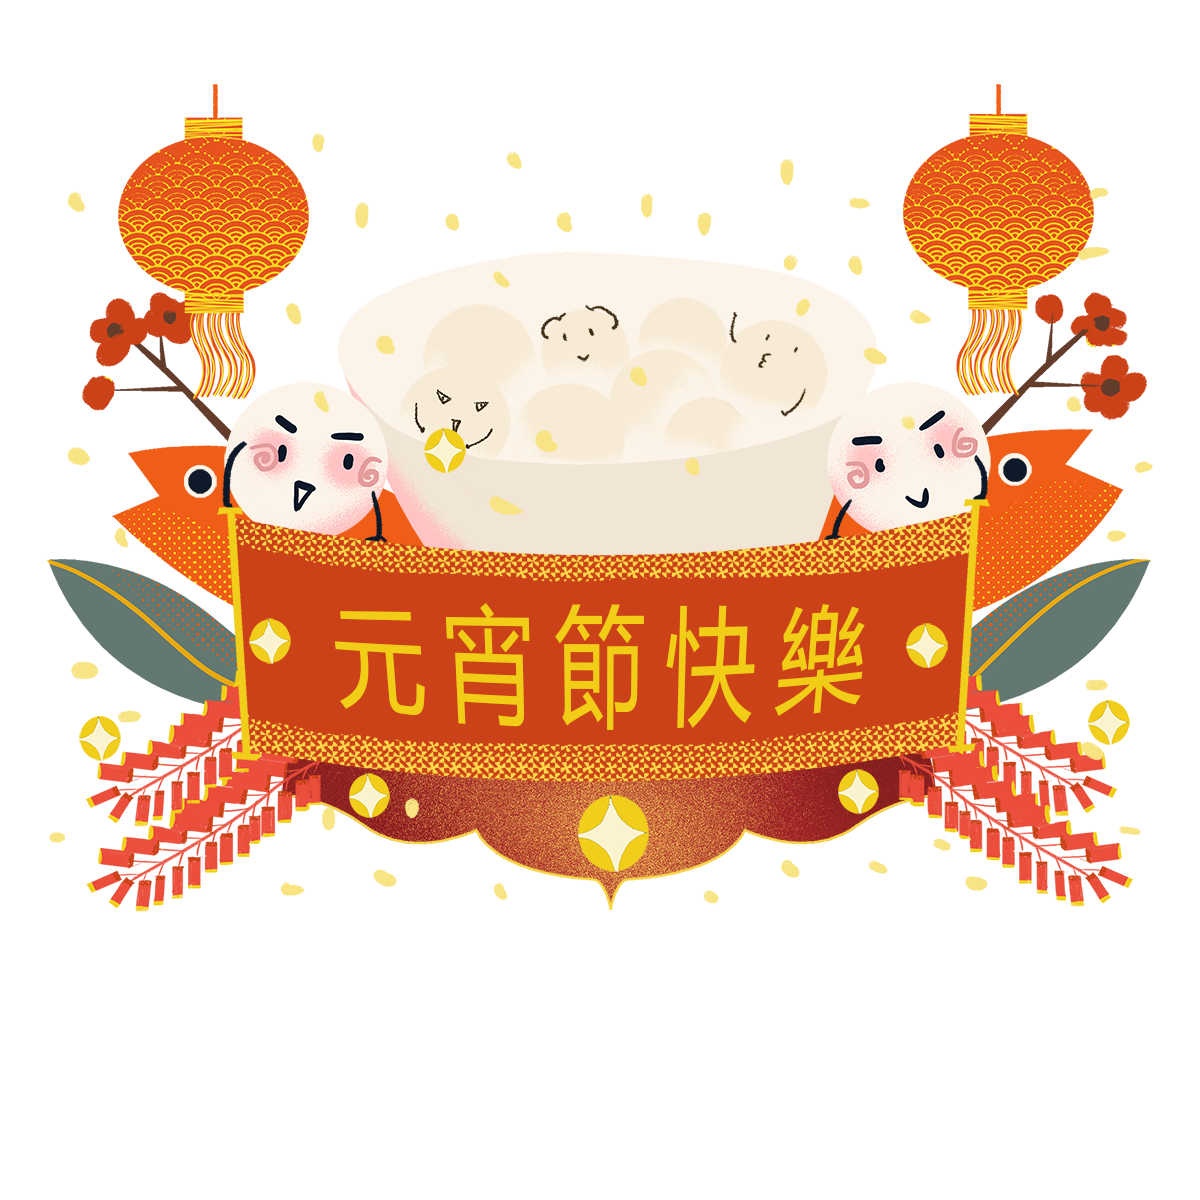 —Pngtree—flat style chinese traditional festival_3787404.png